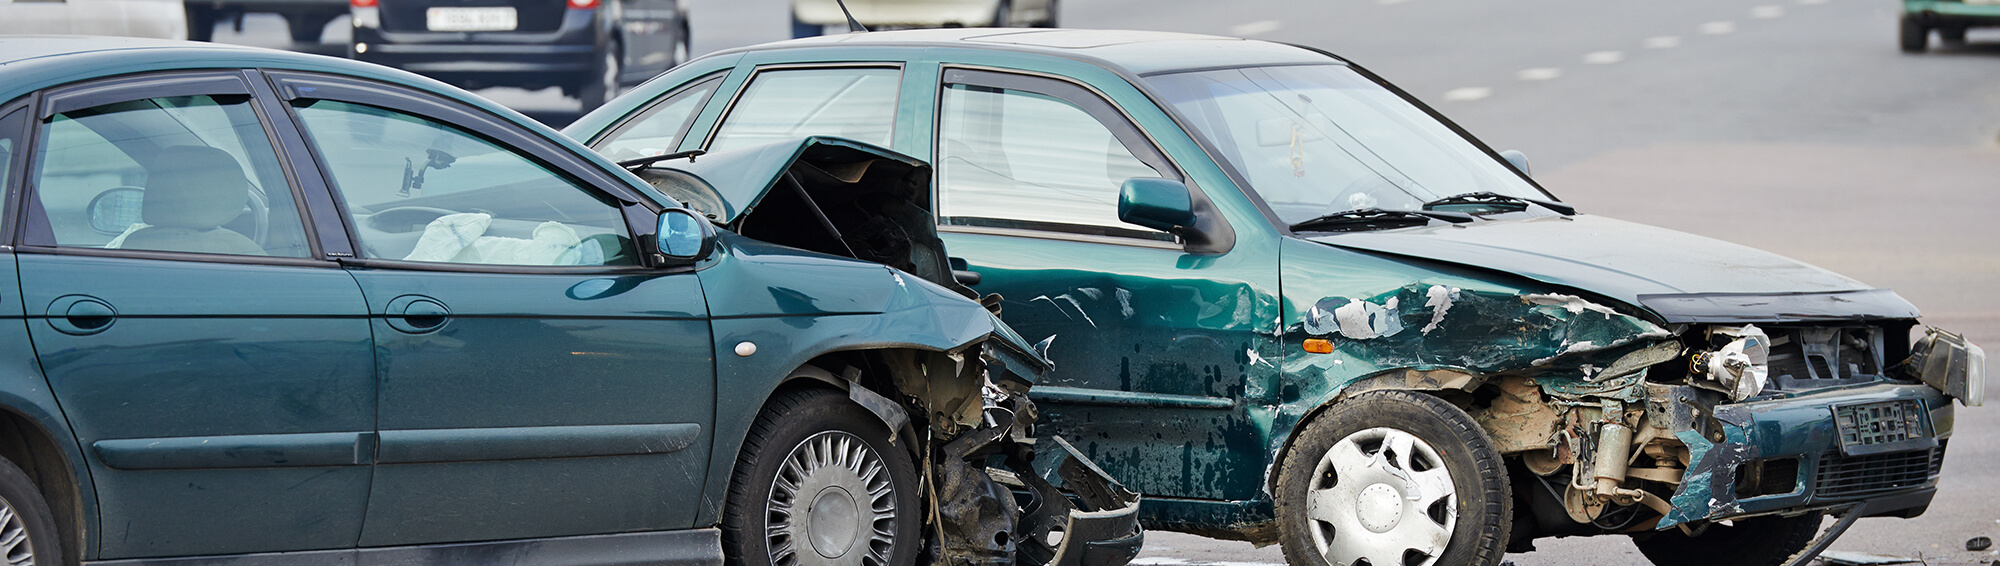 Auto Accident Injuries Aren’t Always Obvious